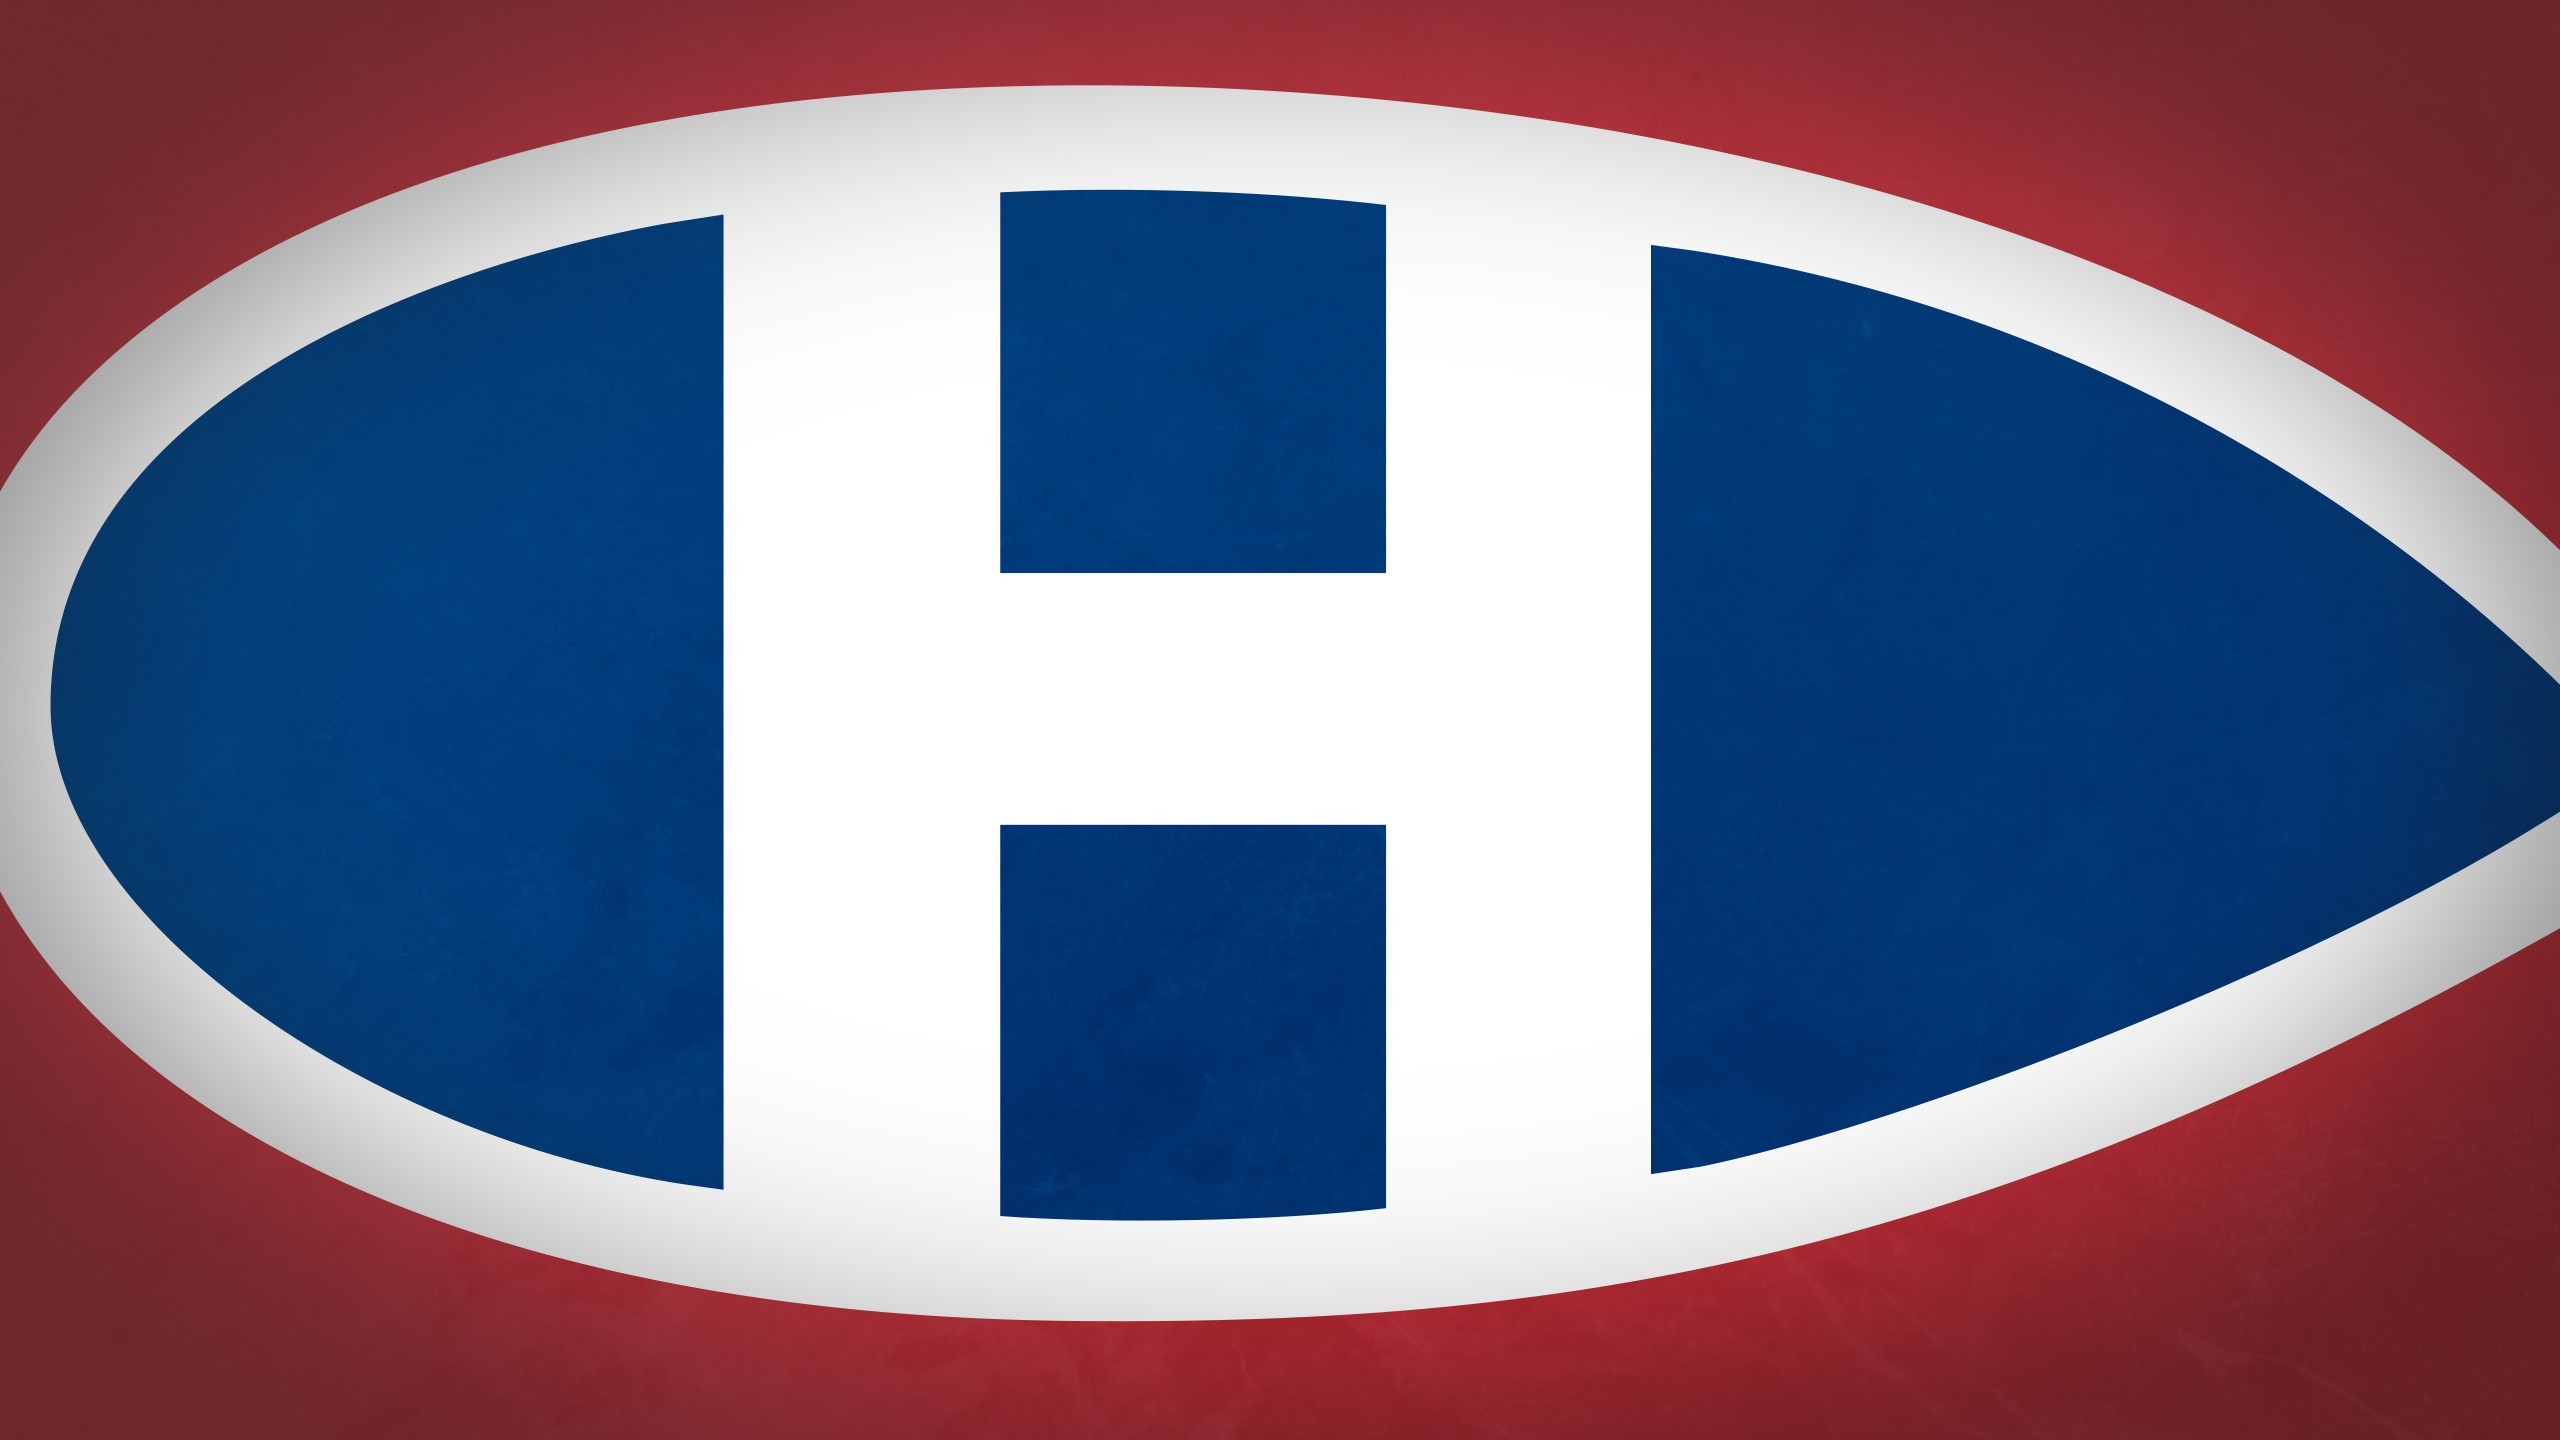 2560x1440 Sports - Montreal Canadiens Wallpaper